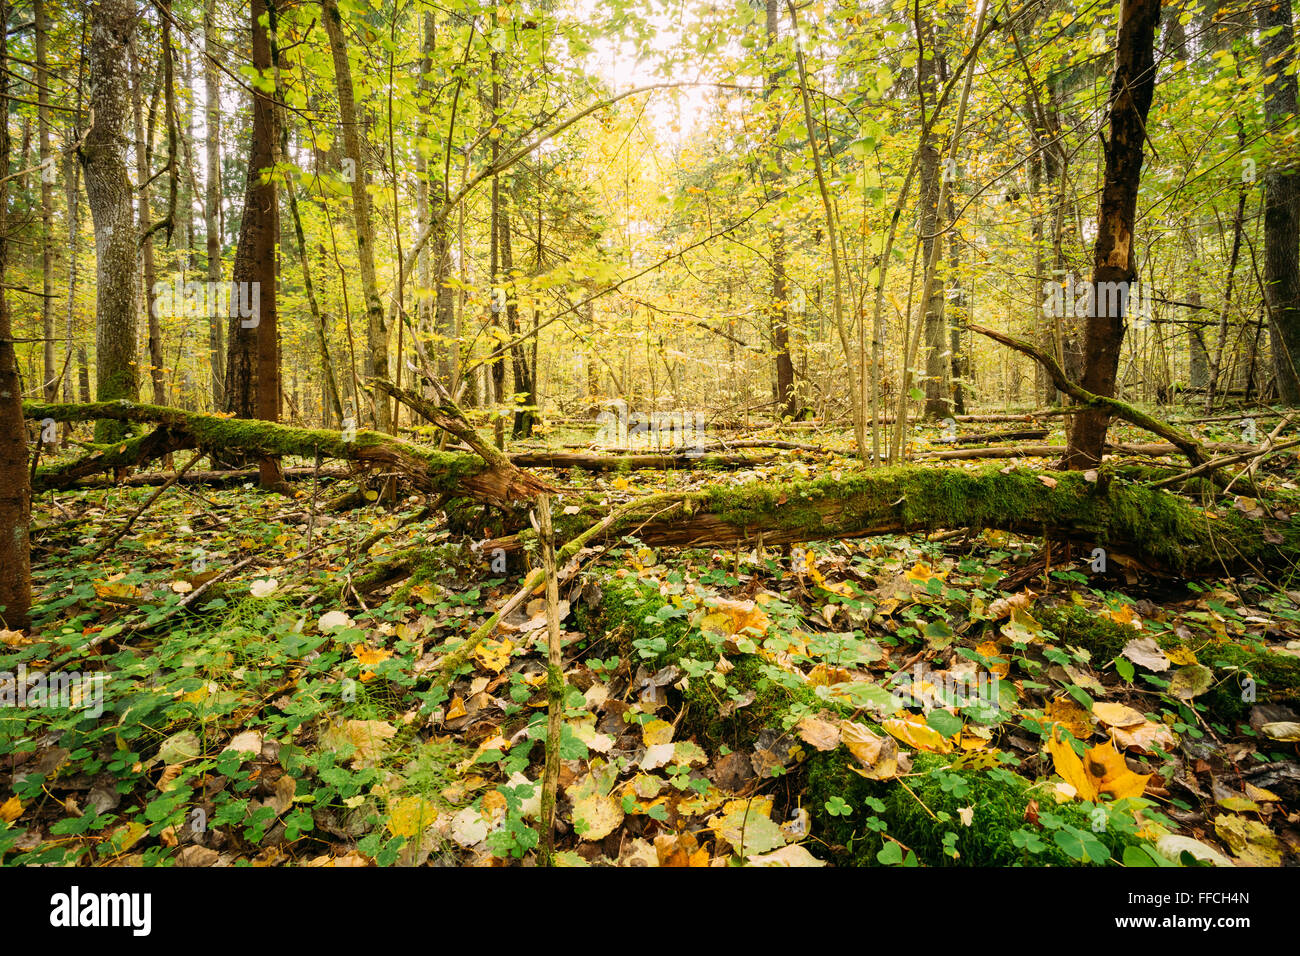 Wild autumn forest. Fallen trees in coniferous forest reserve. Reserve without human intervention in the cycle of nature. Stock Photo